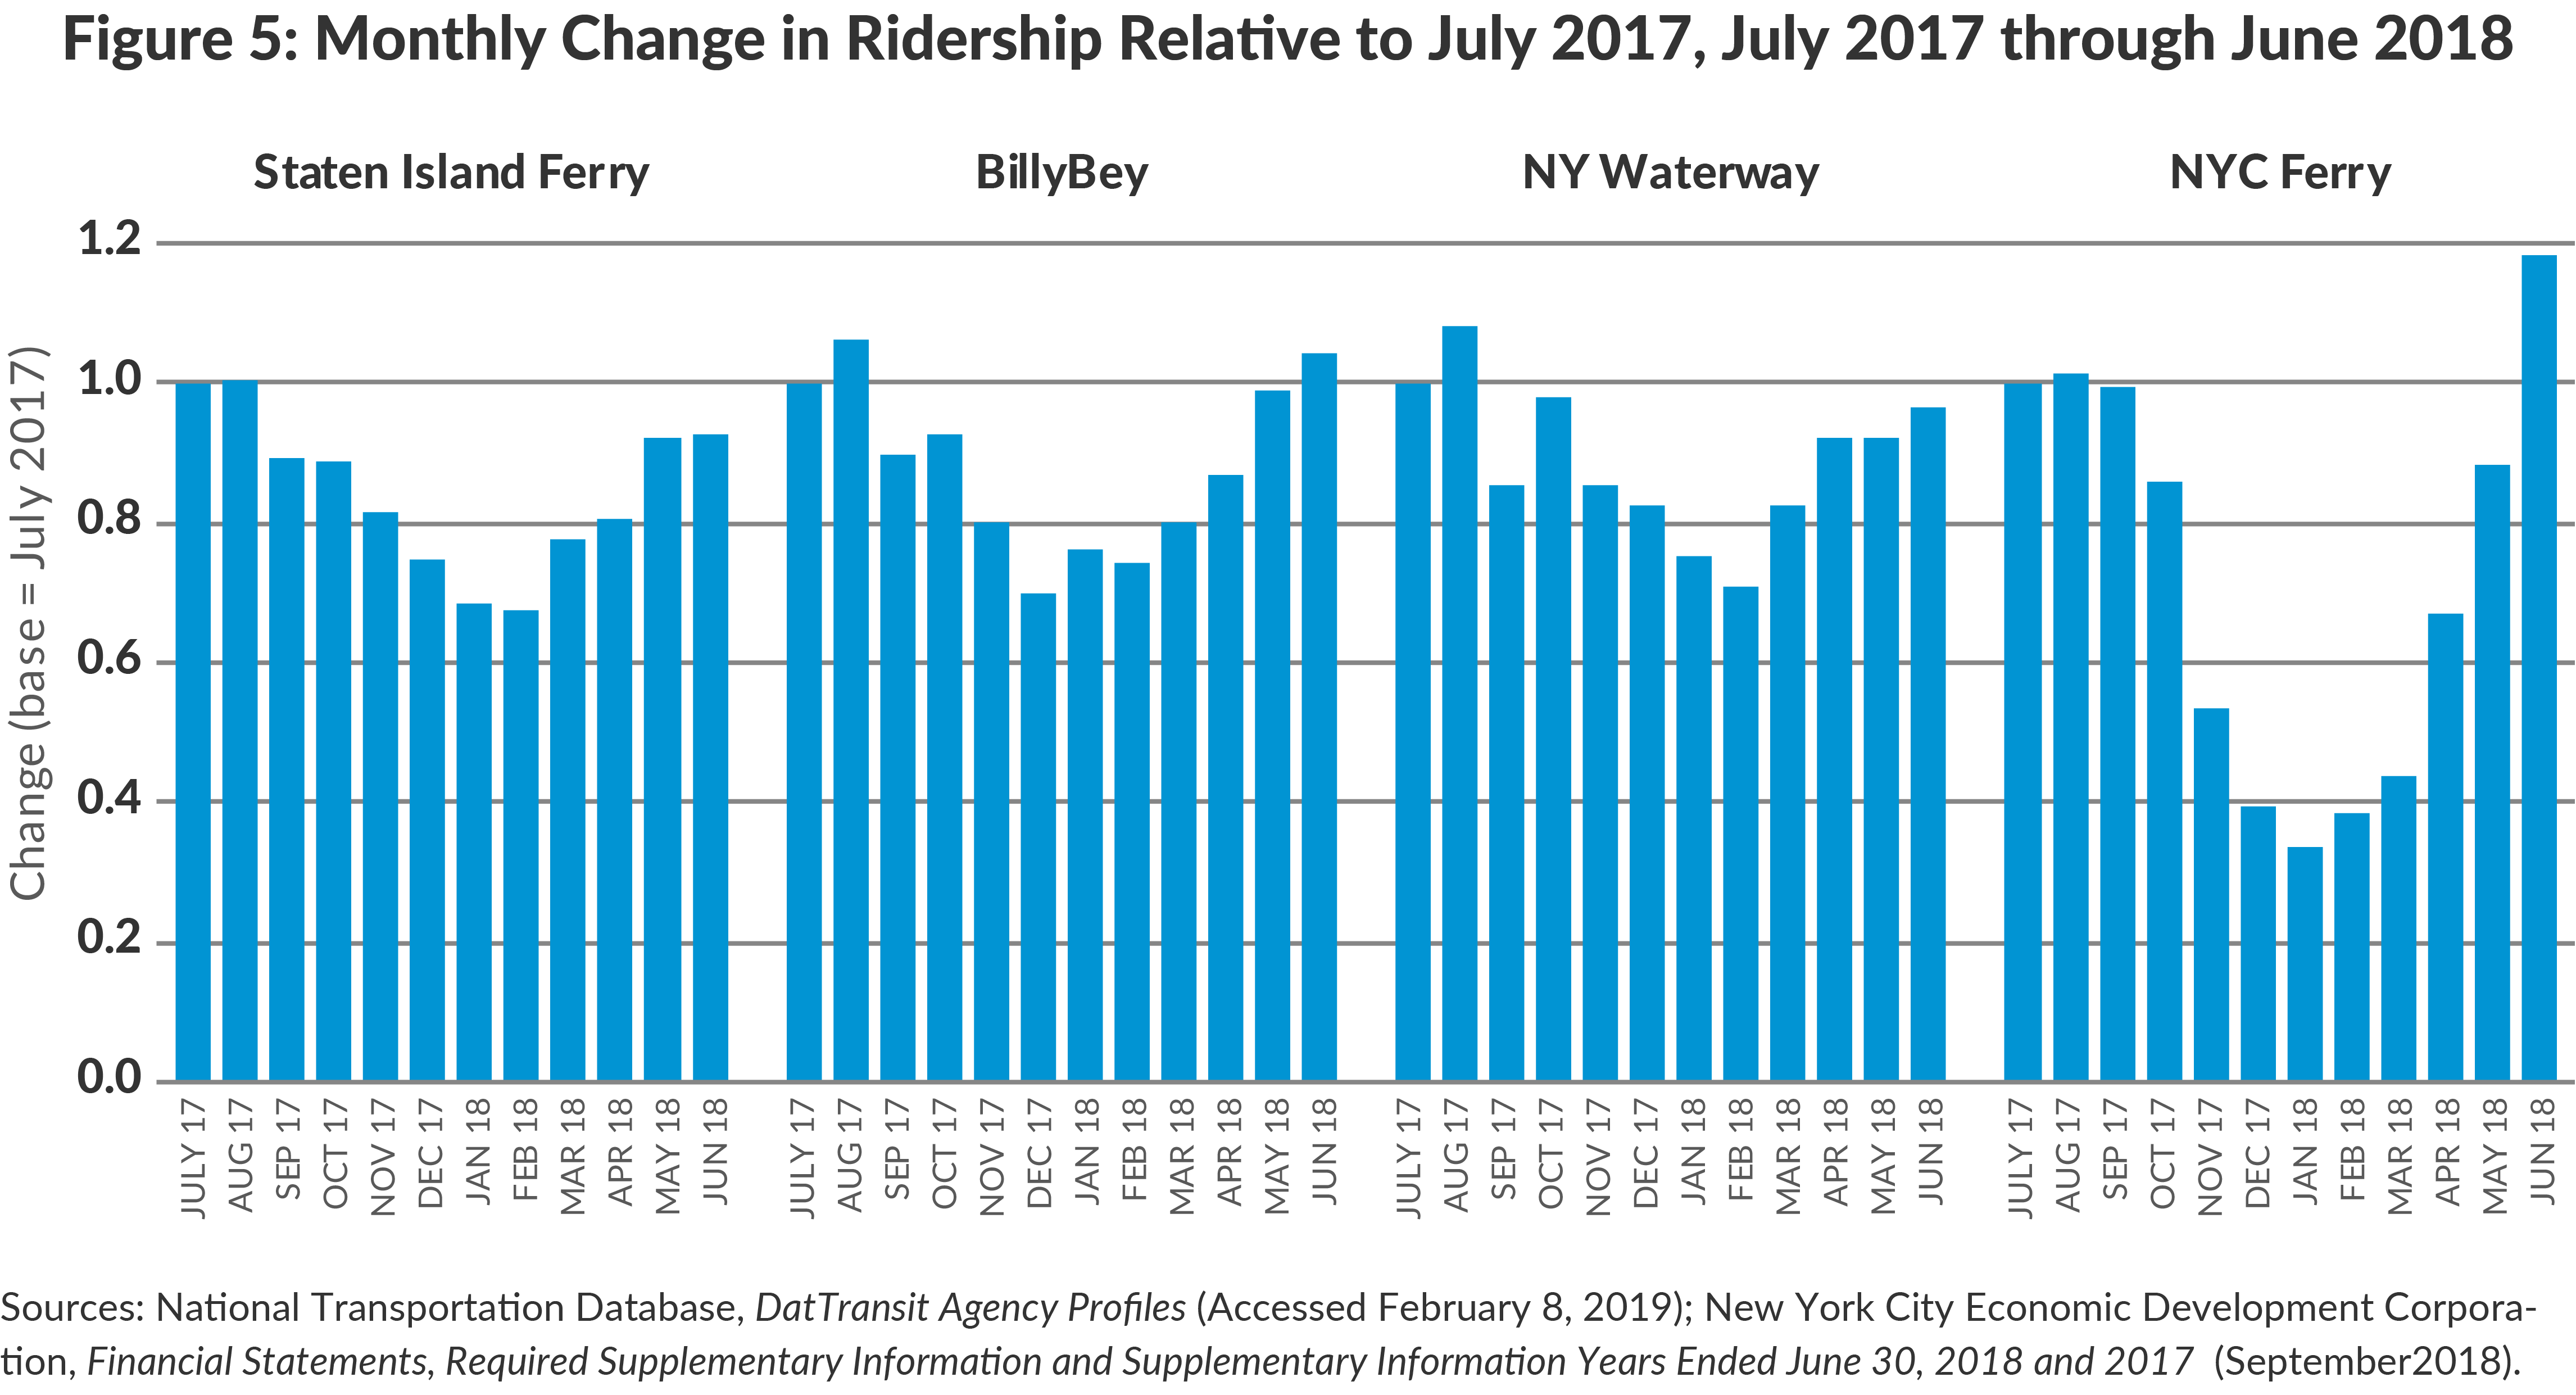 Figure 5. Monthly Change in Ridership Relative to July 2017, July 2017 through June 2018 